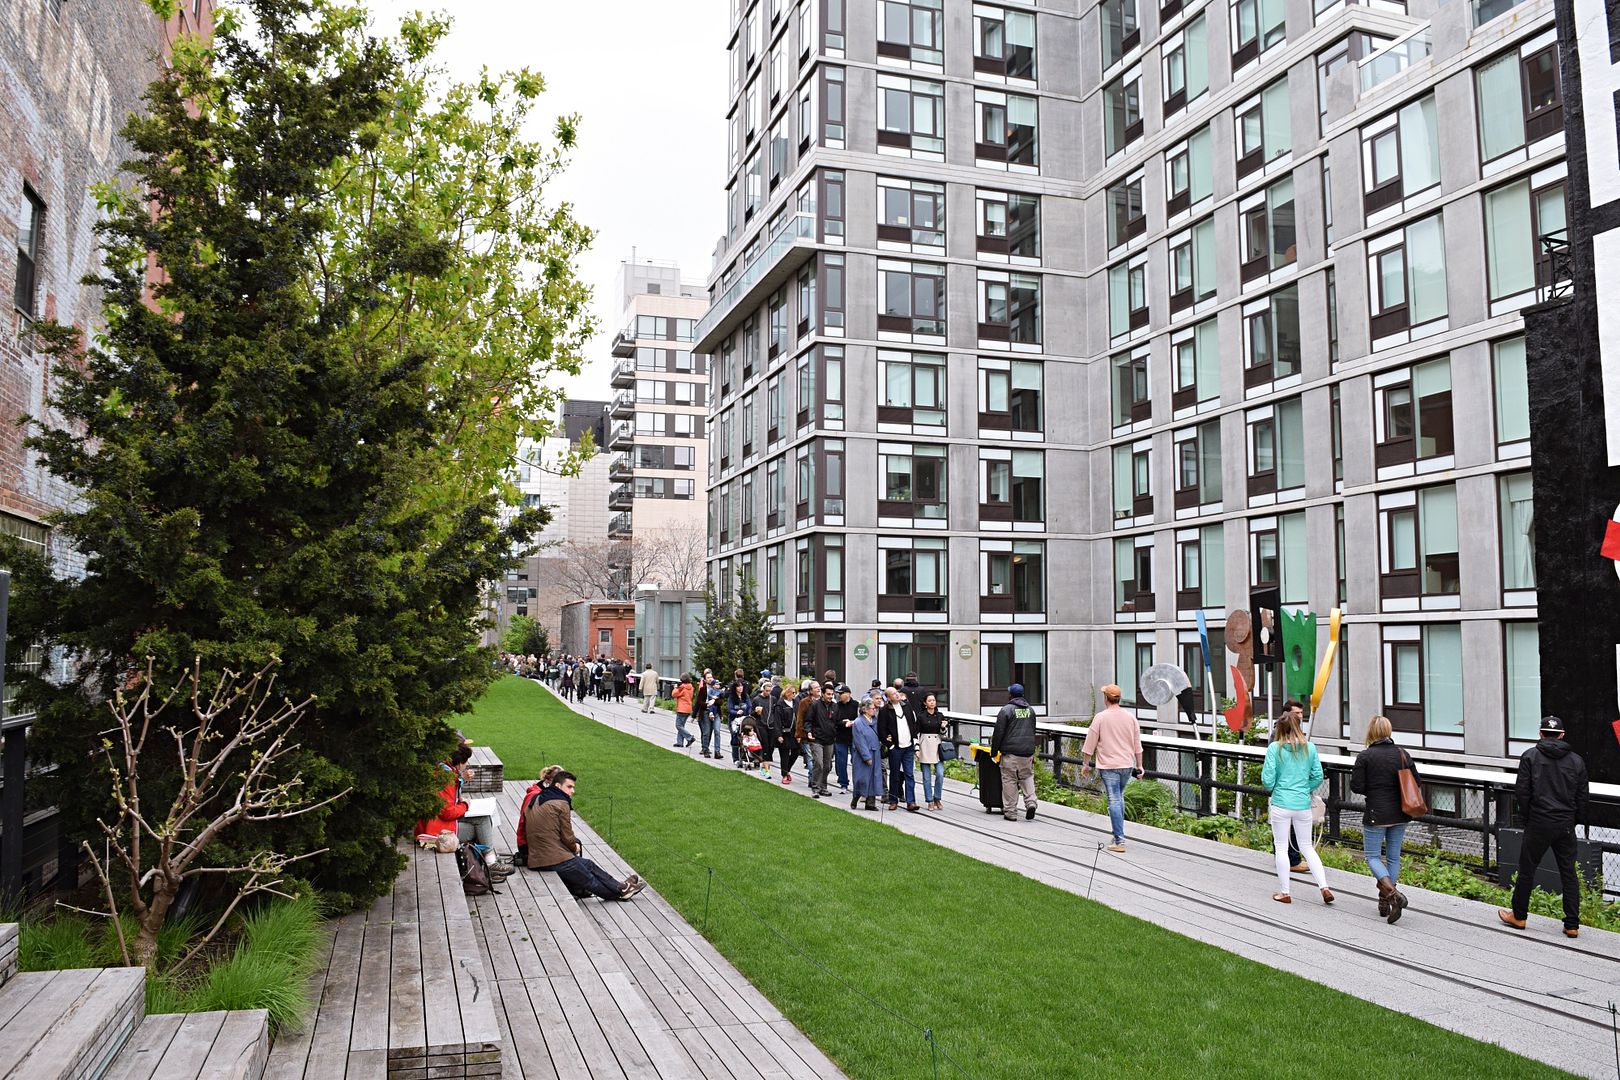 How to walk the Highline New York